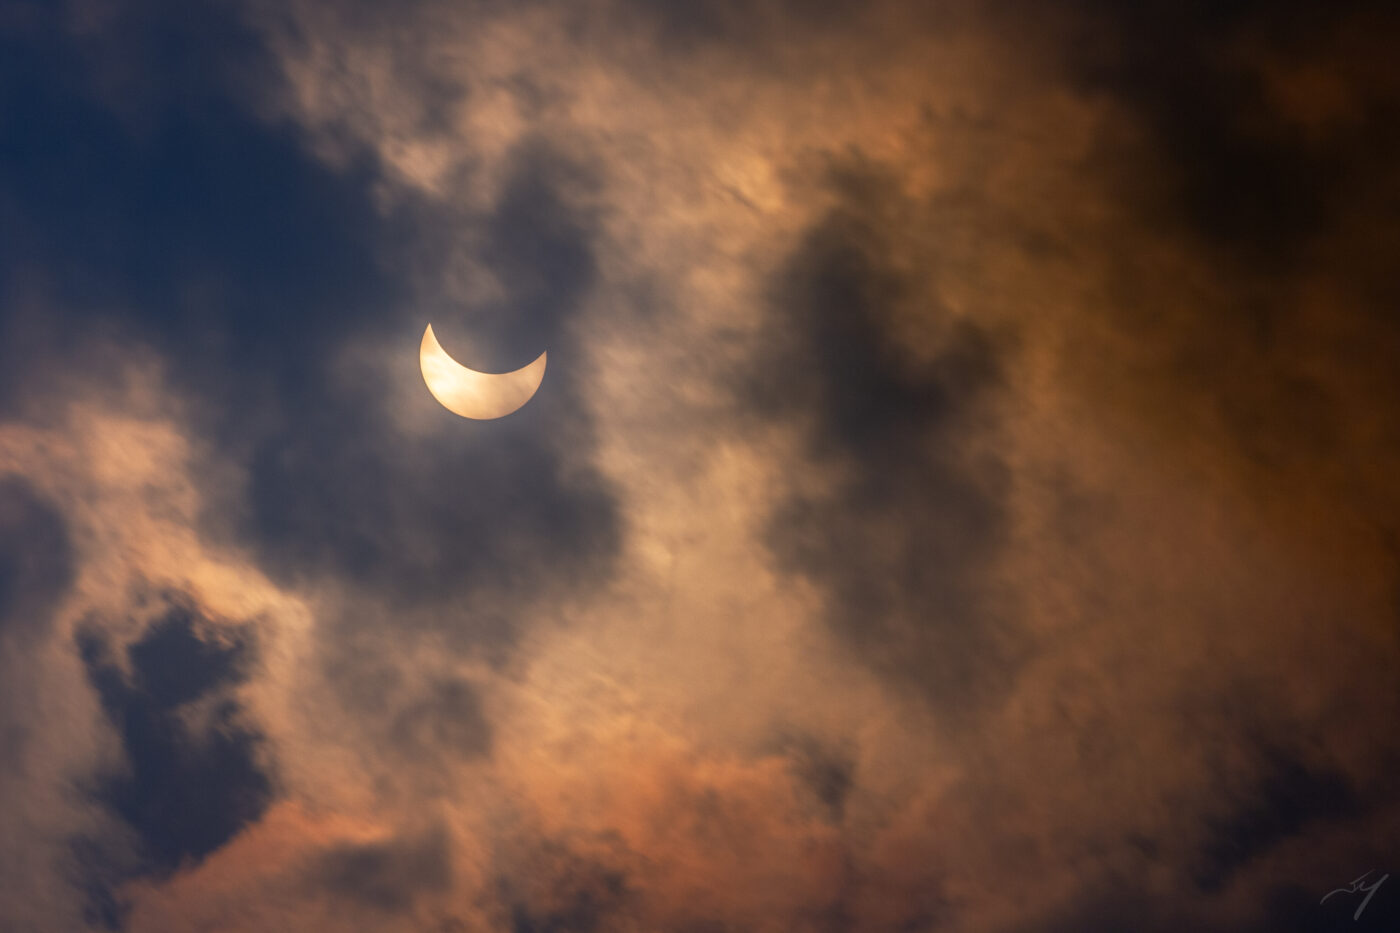 A partially-obscured sun peeks out behind orange-tinted clouds during a solar eclipse.